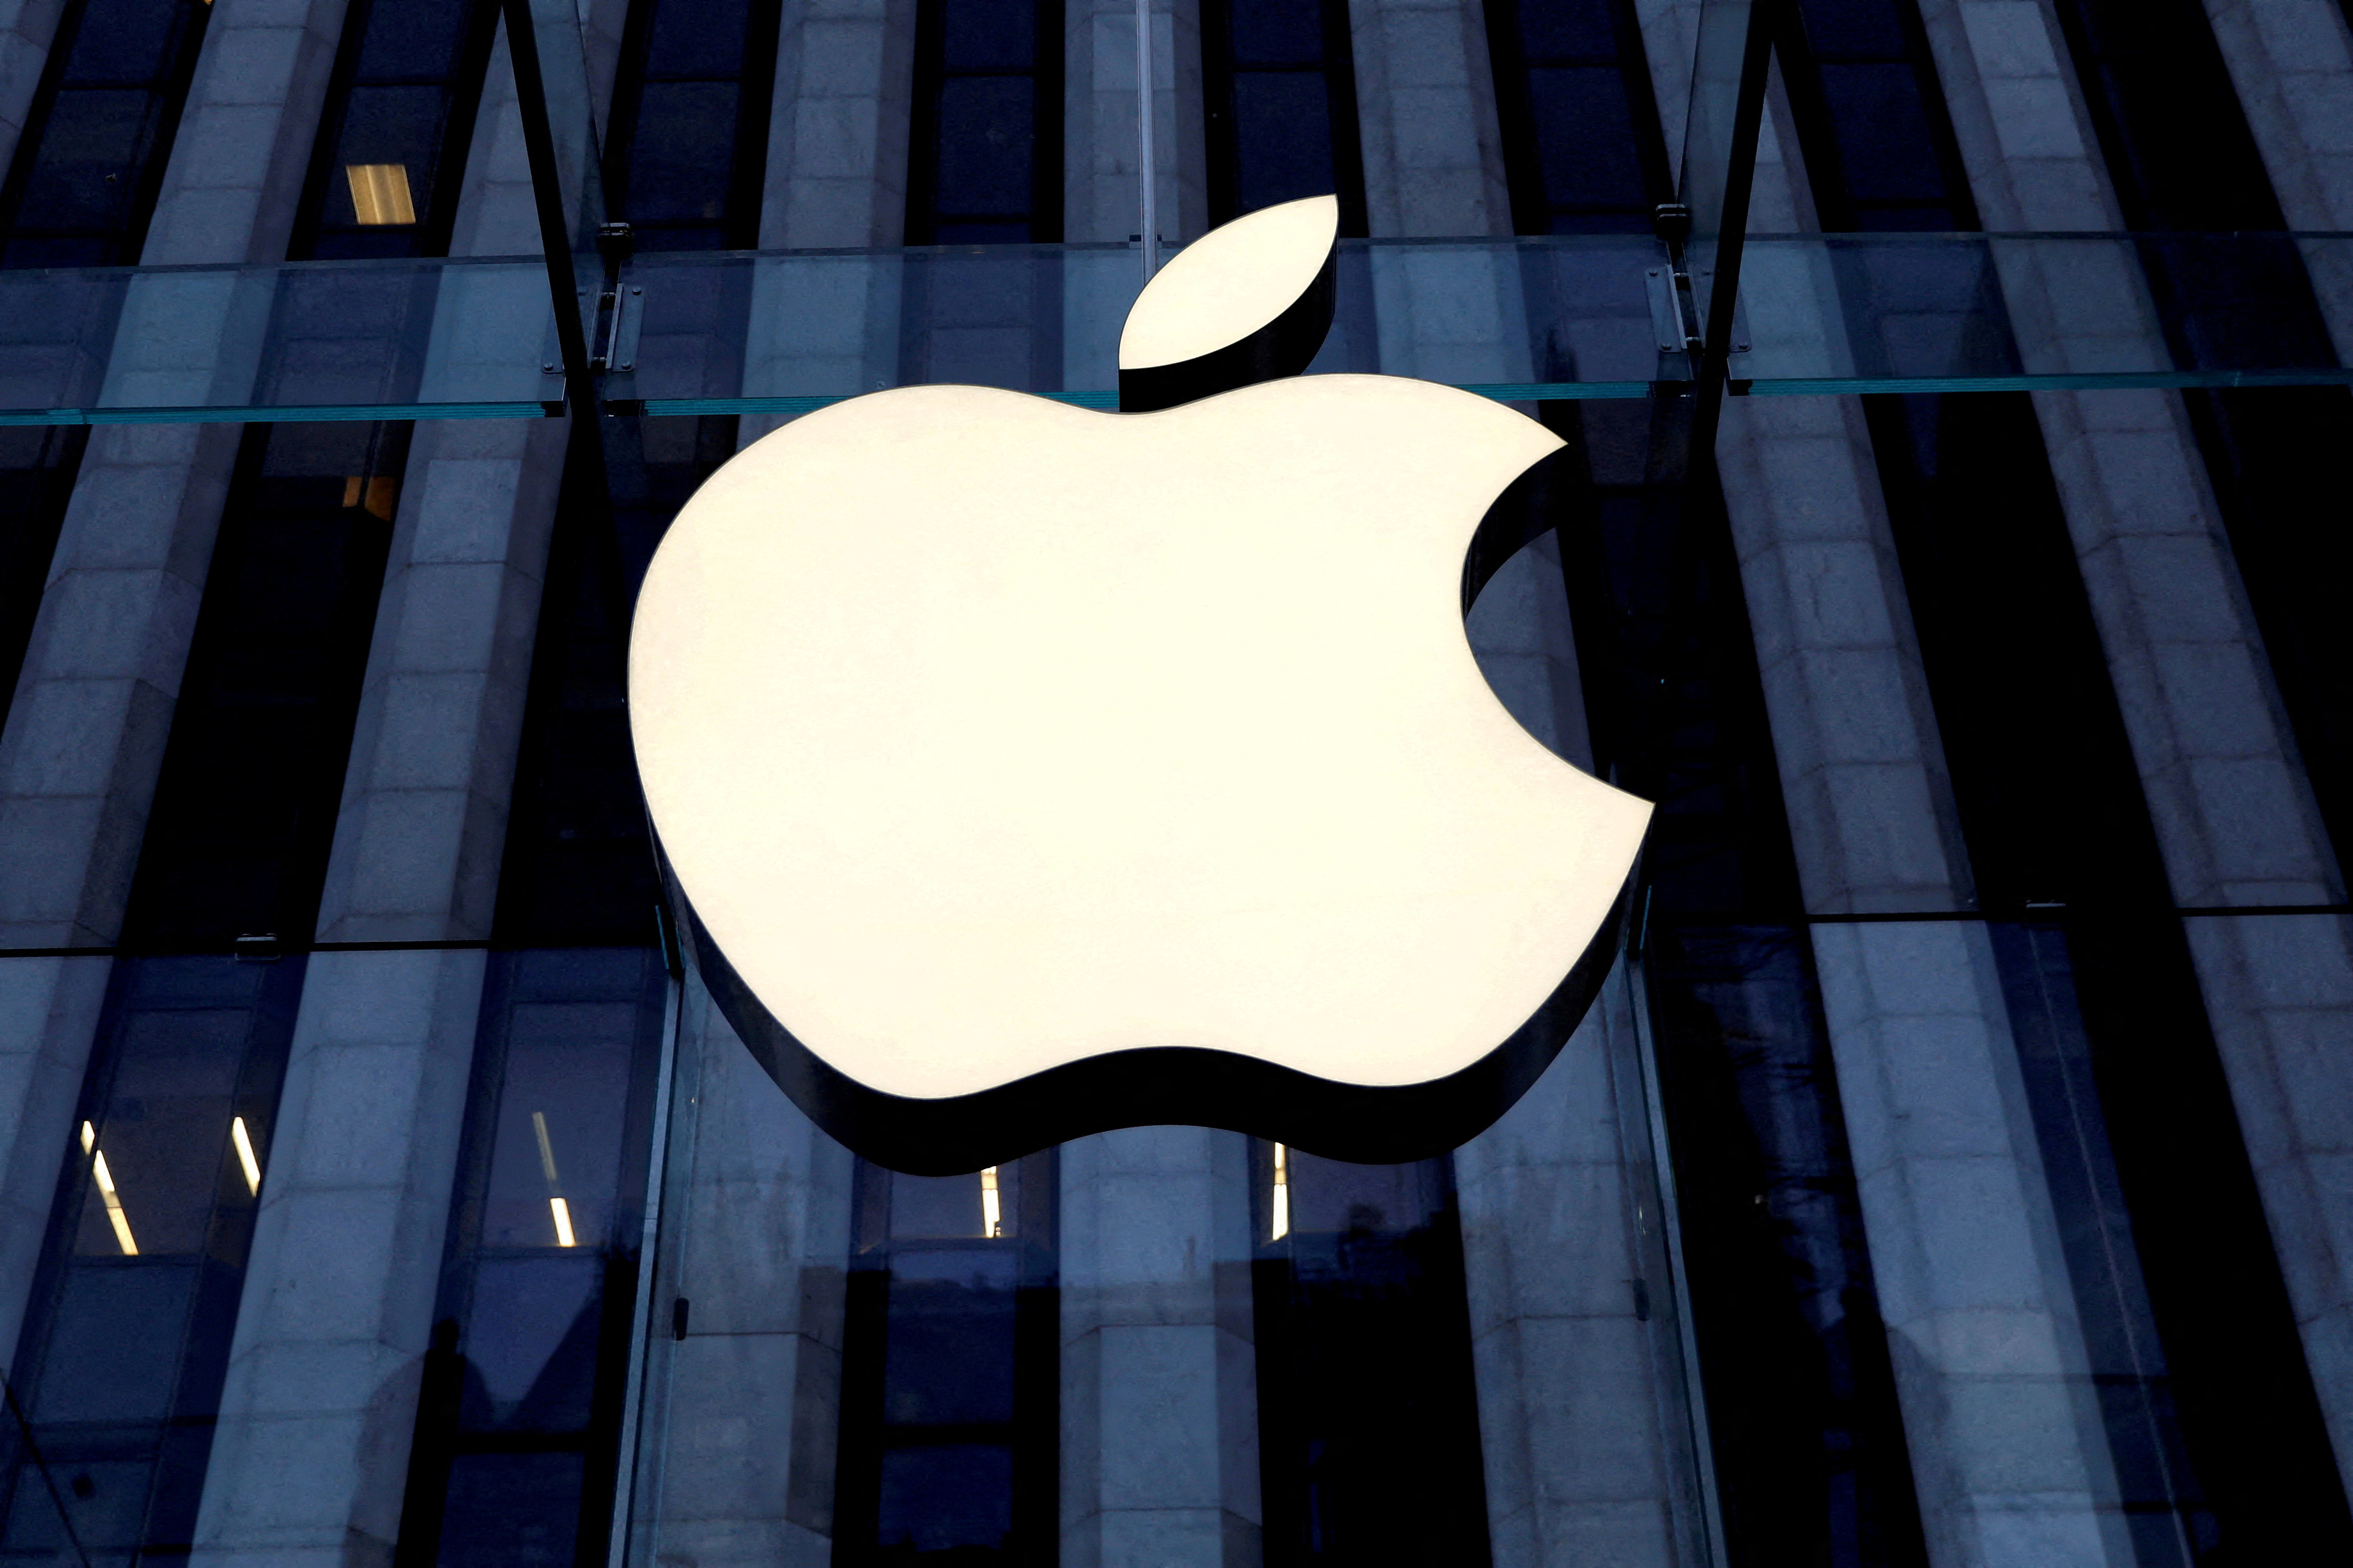 The Apple Inc. logo is seen hanging at the entrance to the Apple store on 5th Avenue in Manhattan, New York, U.S., October 16, 2019. REUTERS/Mike Segar/